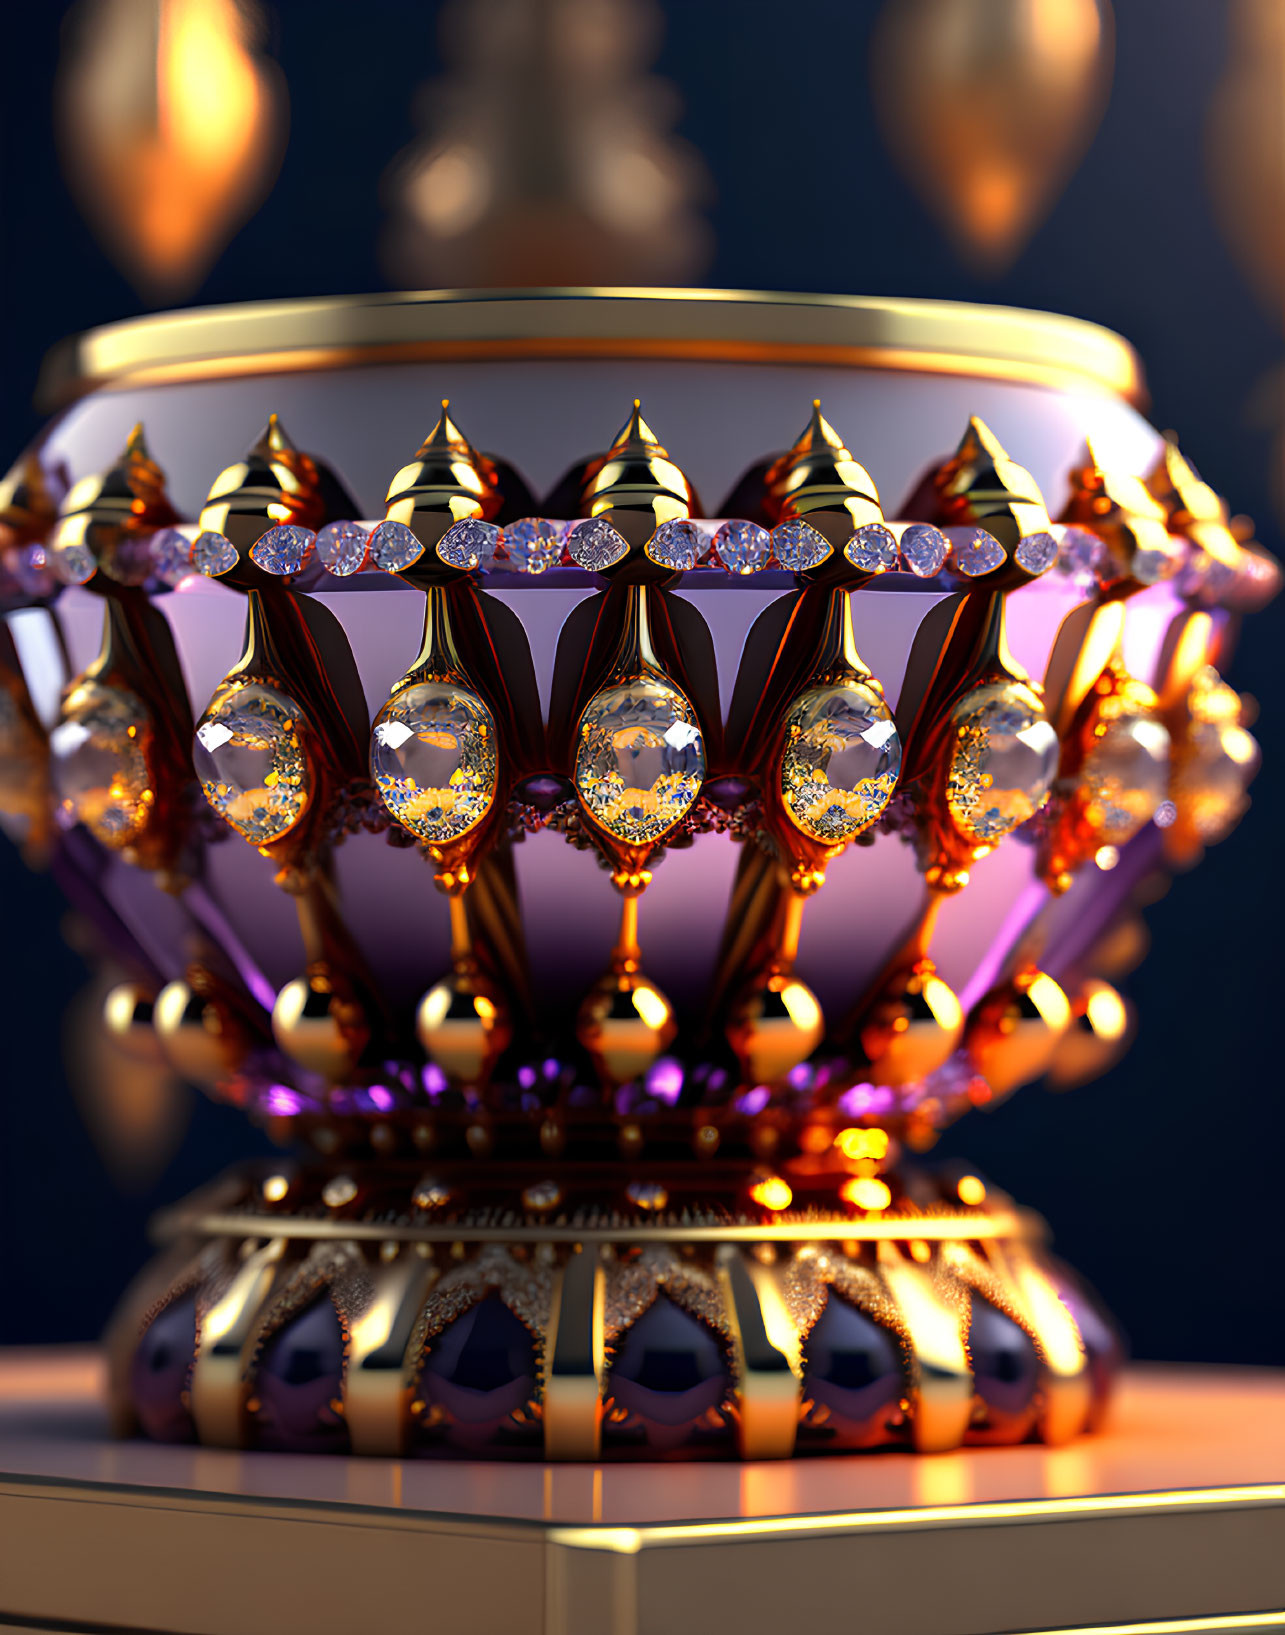 The royal cup